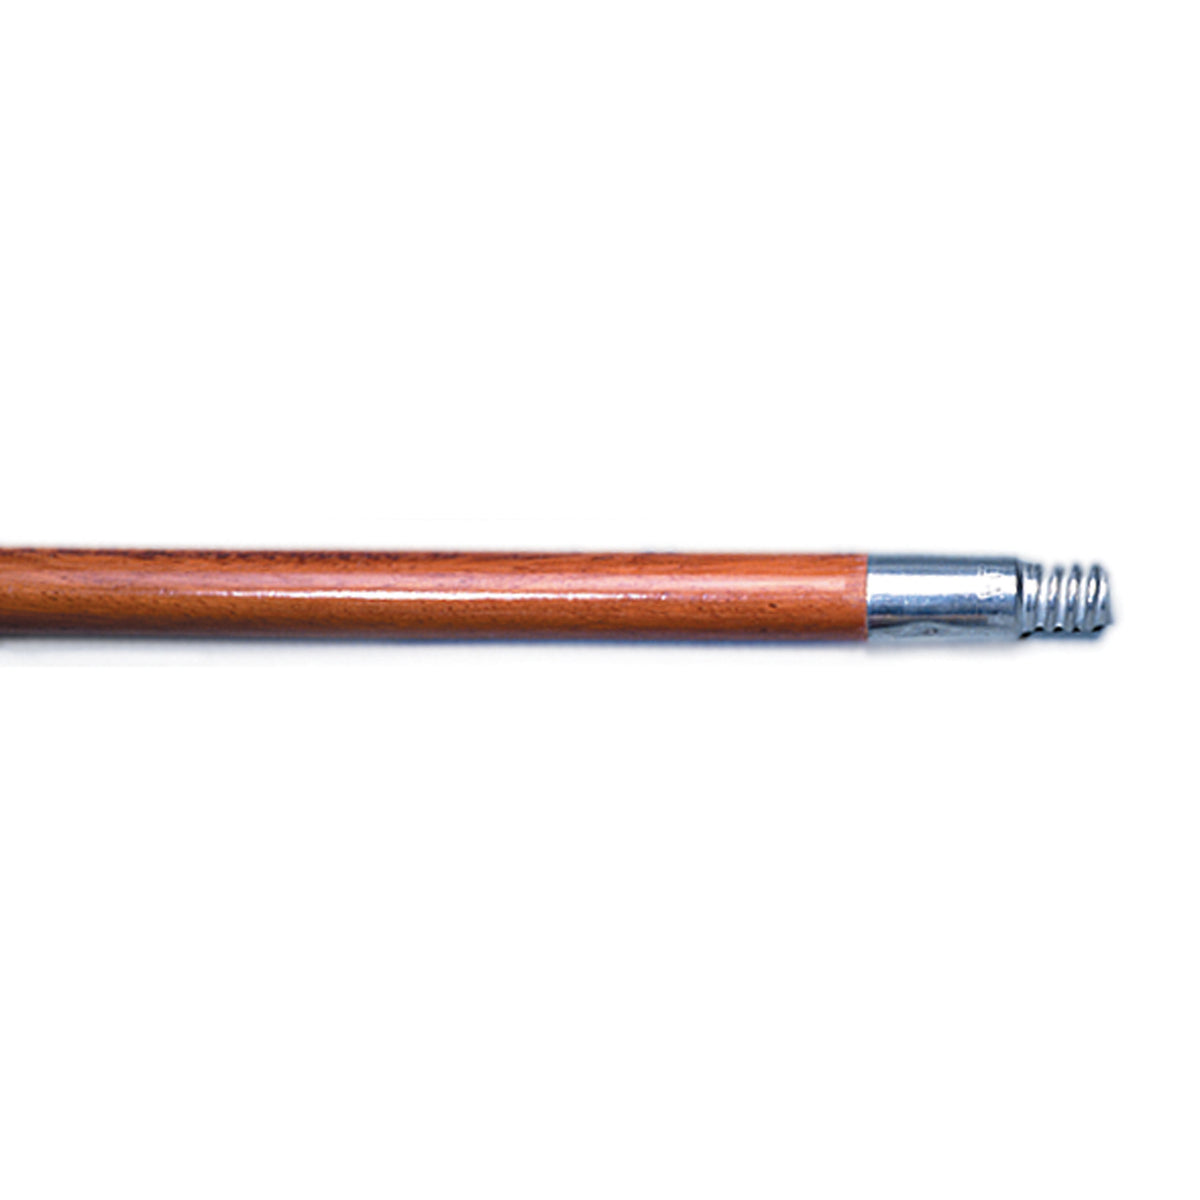 Redtree Industries 36016 Wood Extension Handle with Threaded Metal Tip - 72"